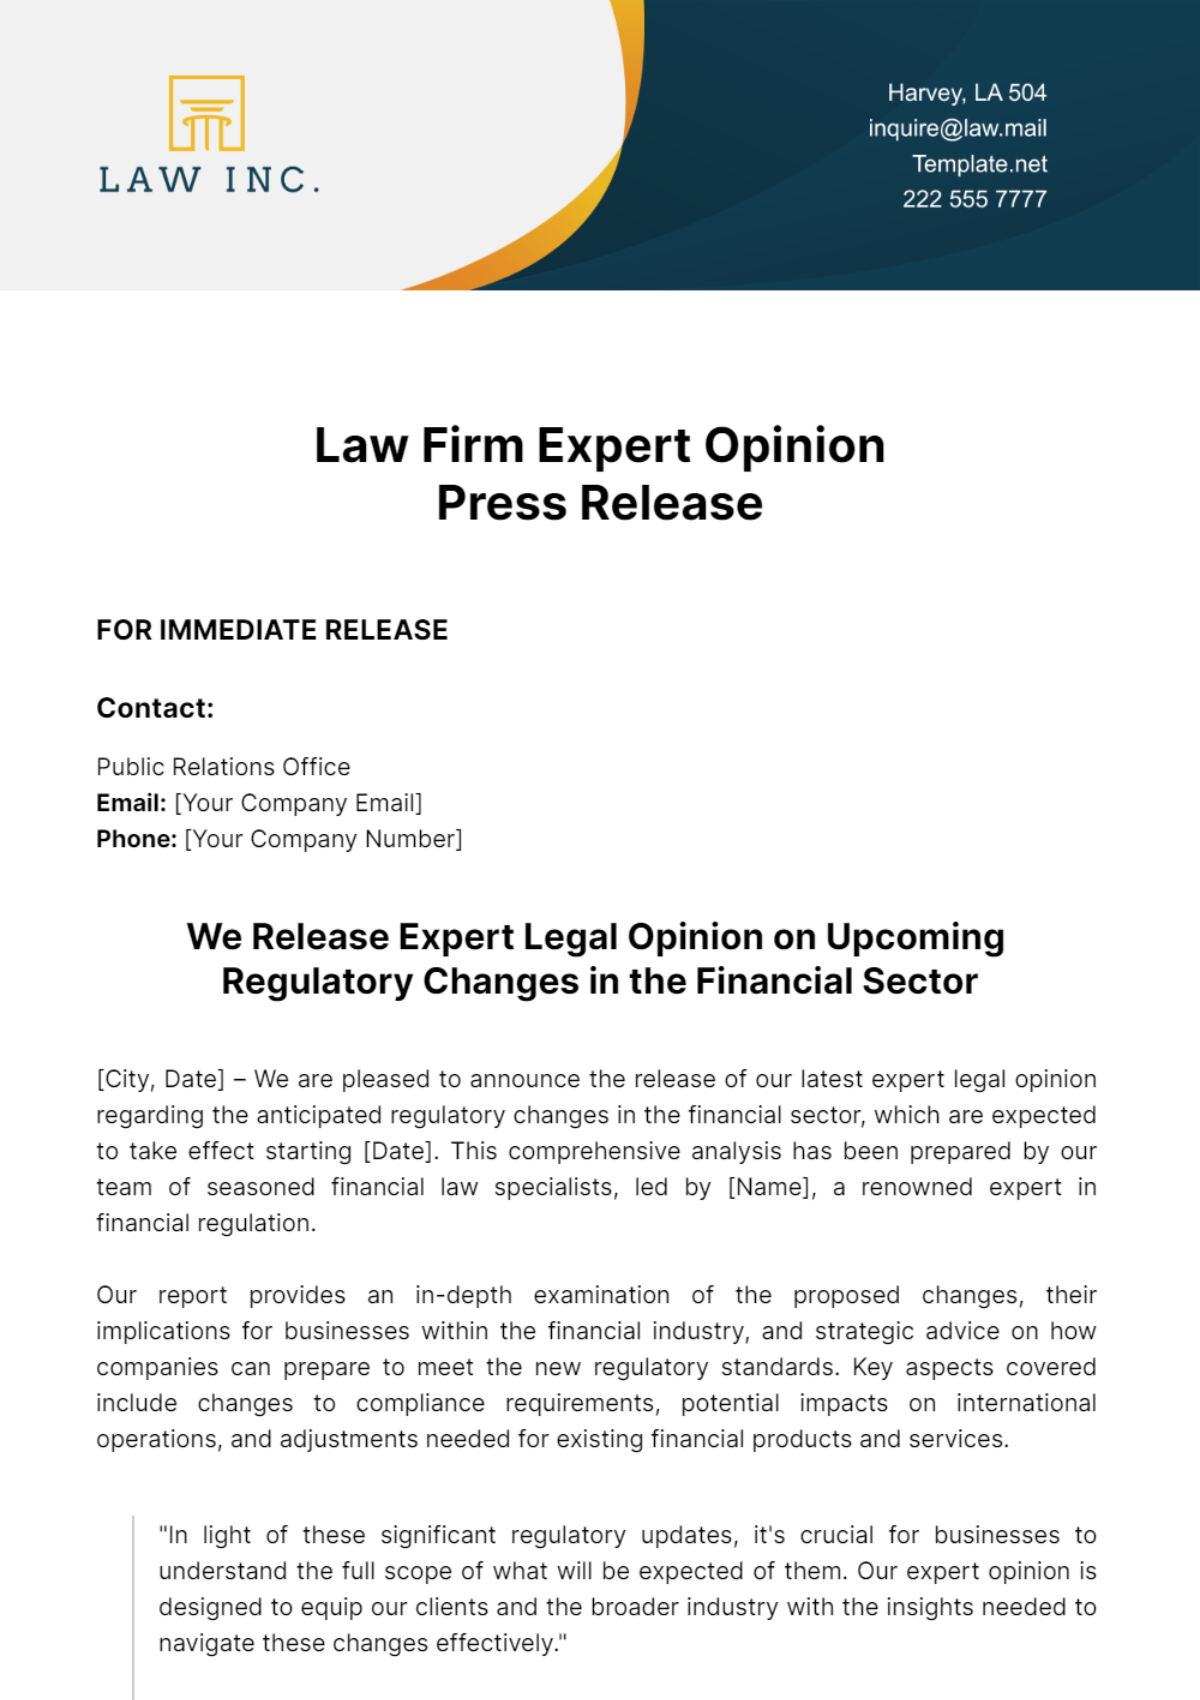 Free Law Firm Expert Opinion Press Release Template